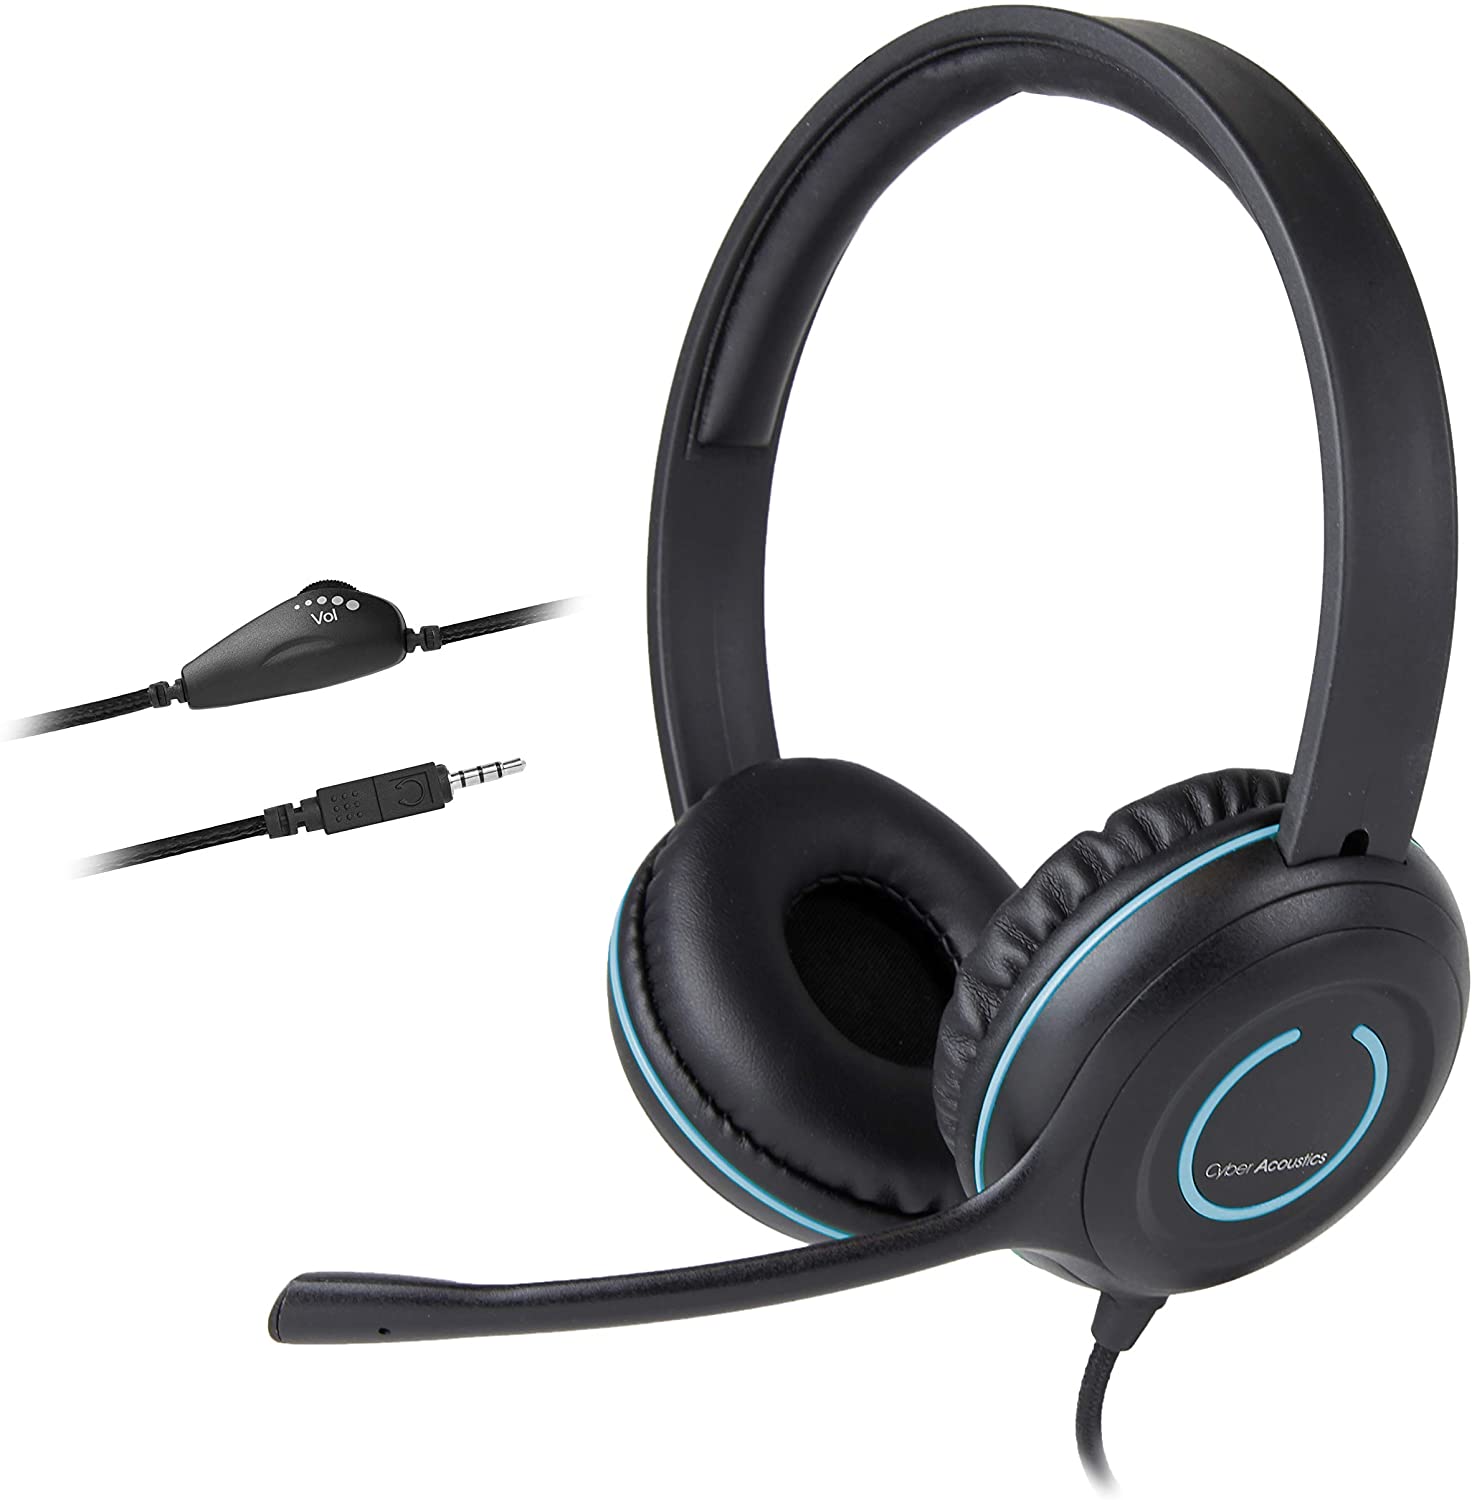 Cyber Acoustics - best headset for dictation